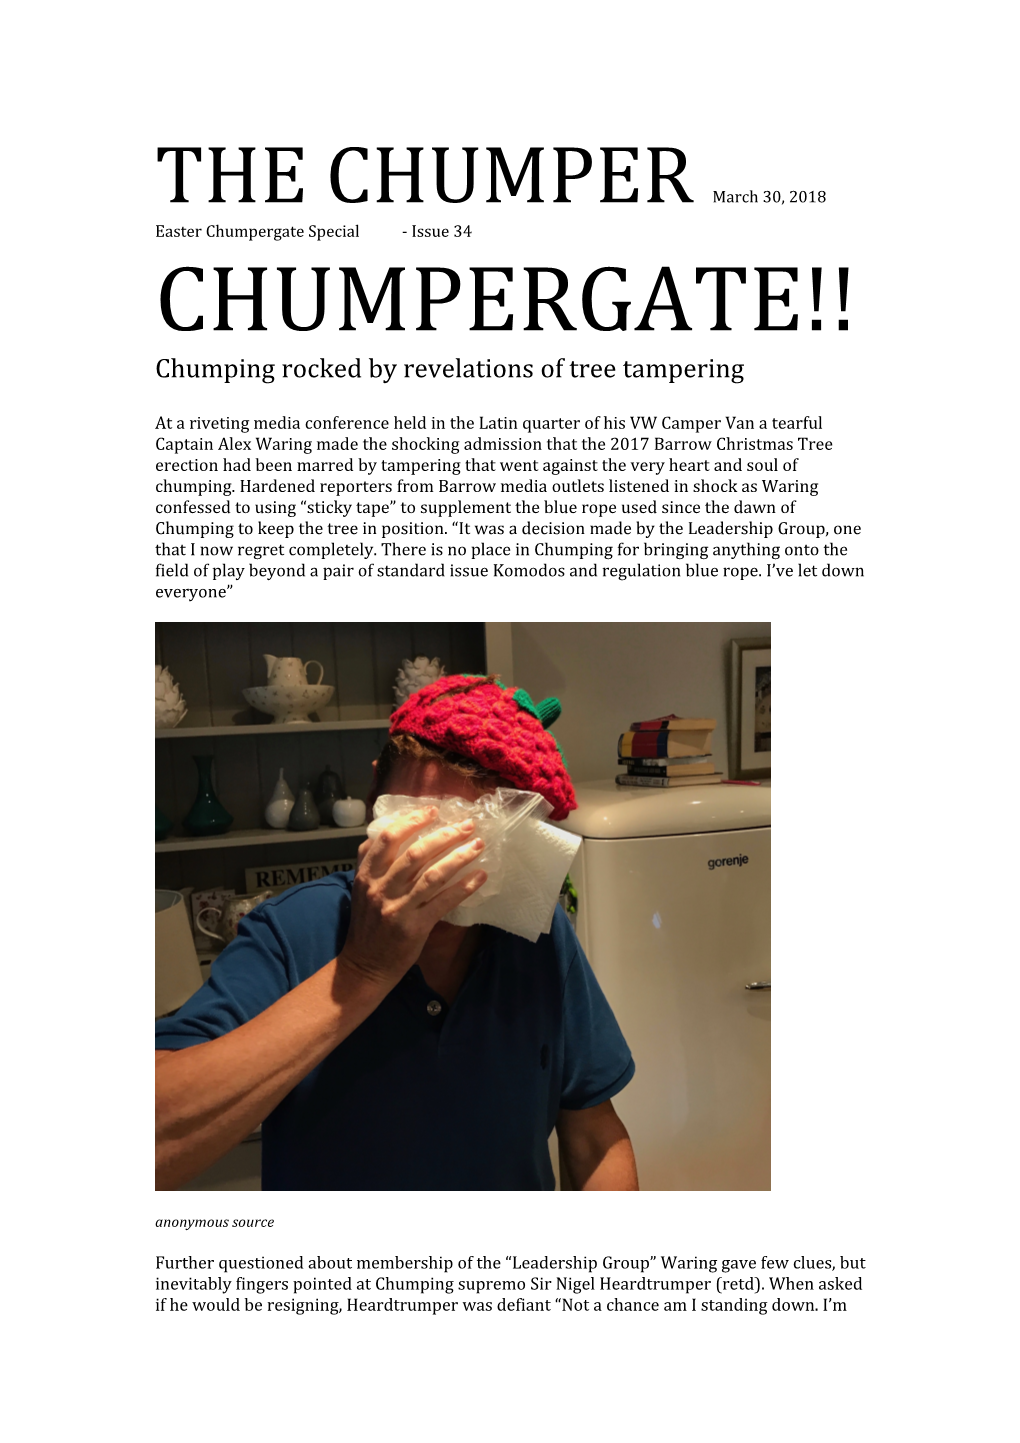 Easter Chumpergate Special- Issue 34